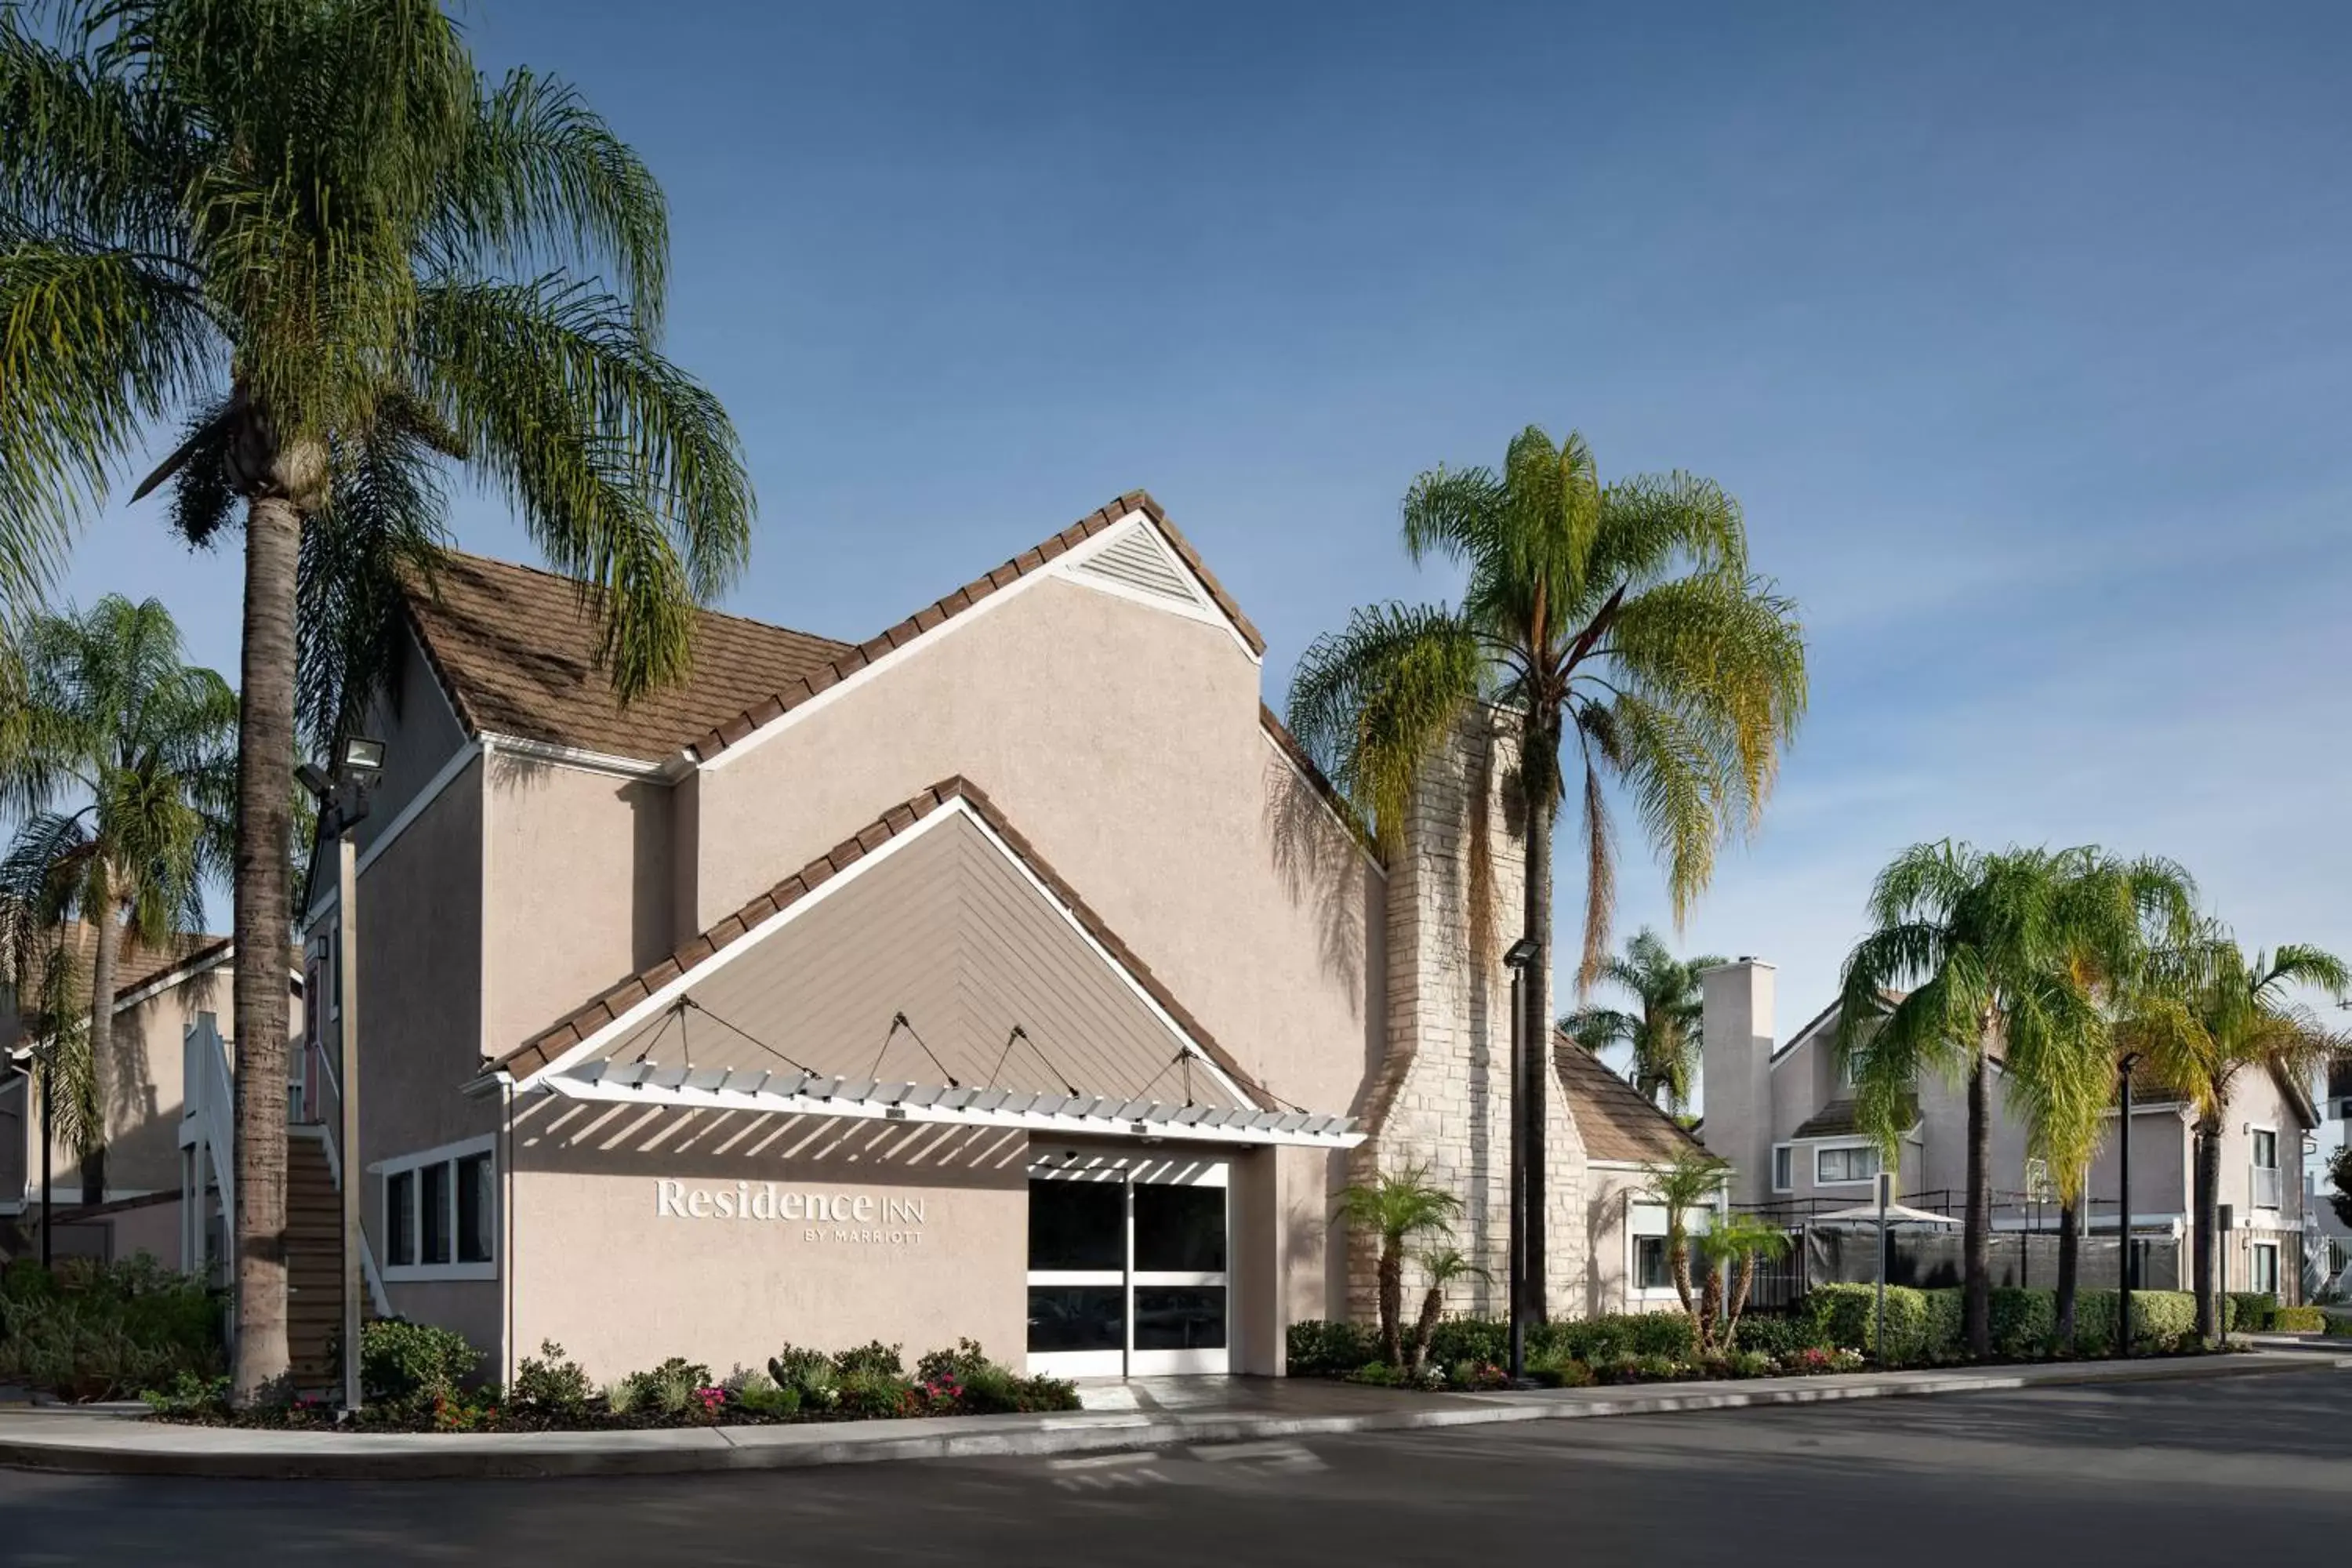 Property Building in Residence Inn Anaheim Placentia/Fullerton